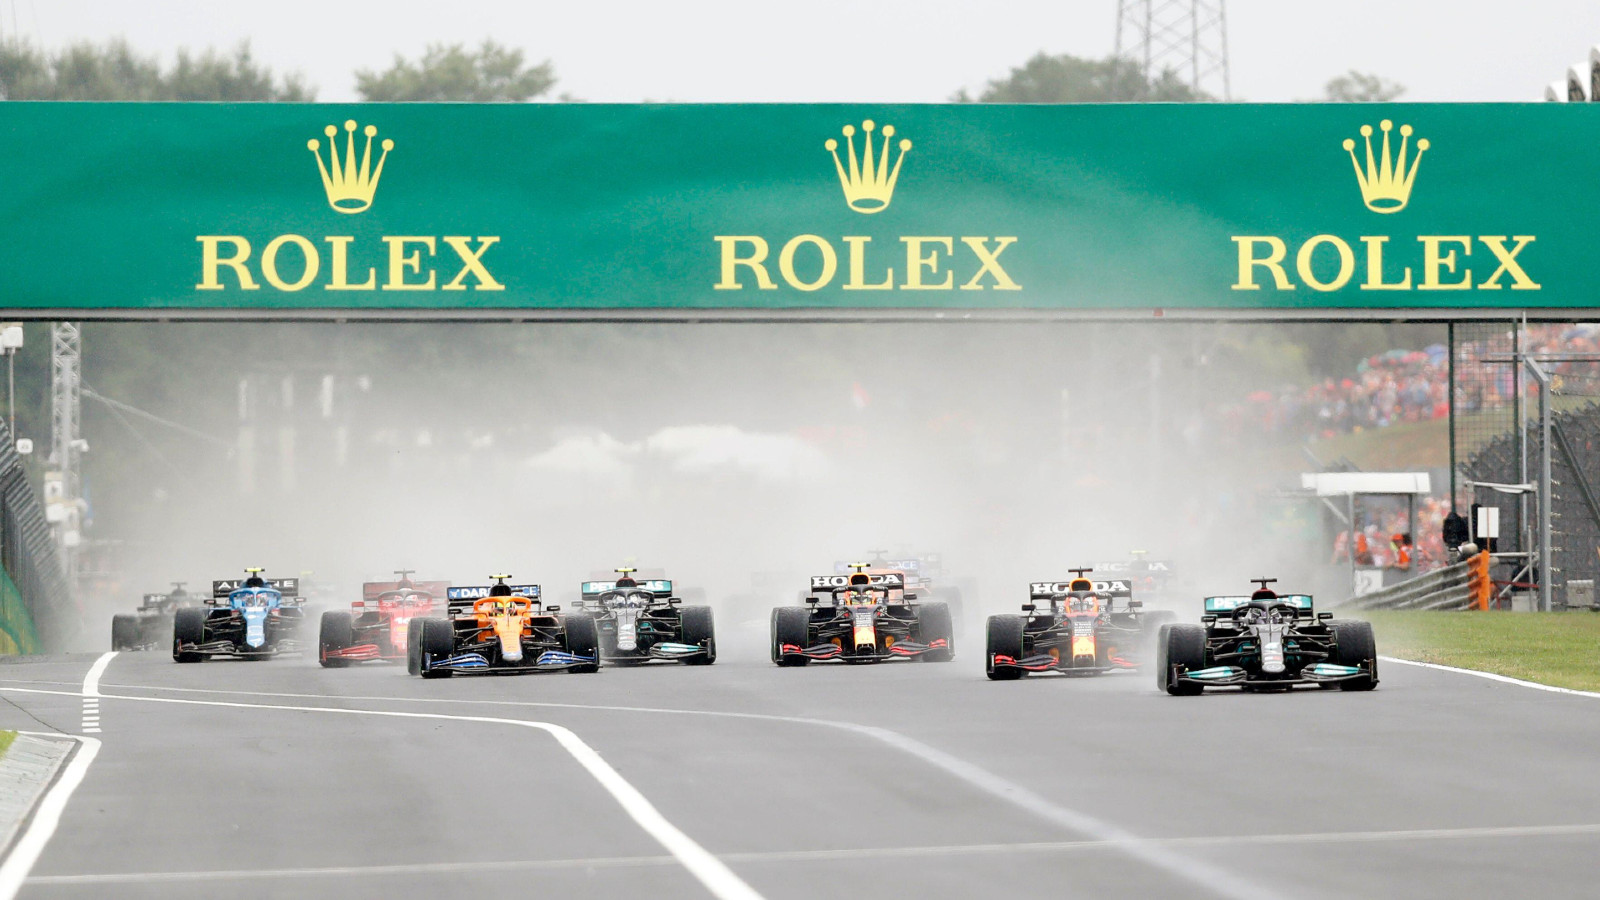 The start of the 2021 Hungarian Grand Prix. Budapest, July 2021.